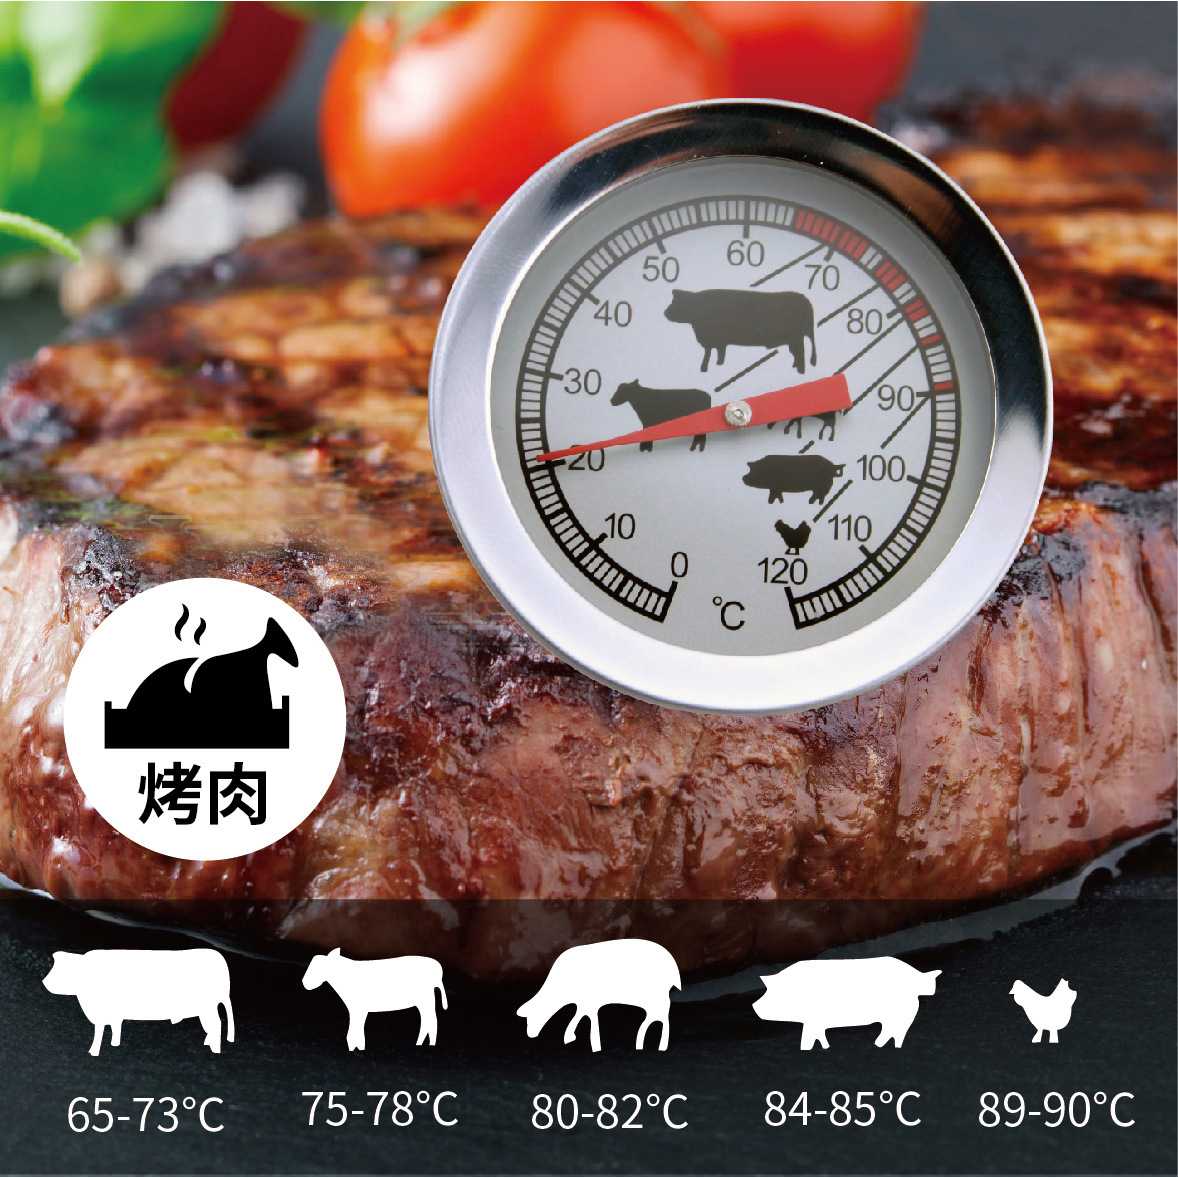 Stainless Steel Bimetal Barbecue Thermometer Kitchen Household Barbecue Steak Baking Probe Type Food Thermometer